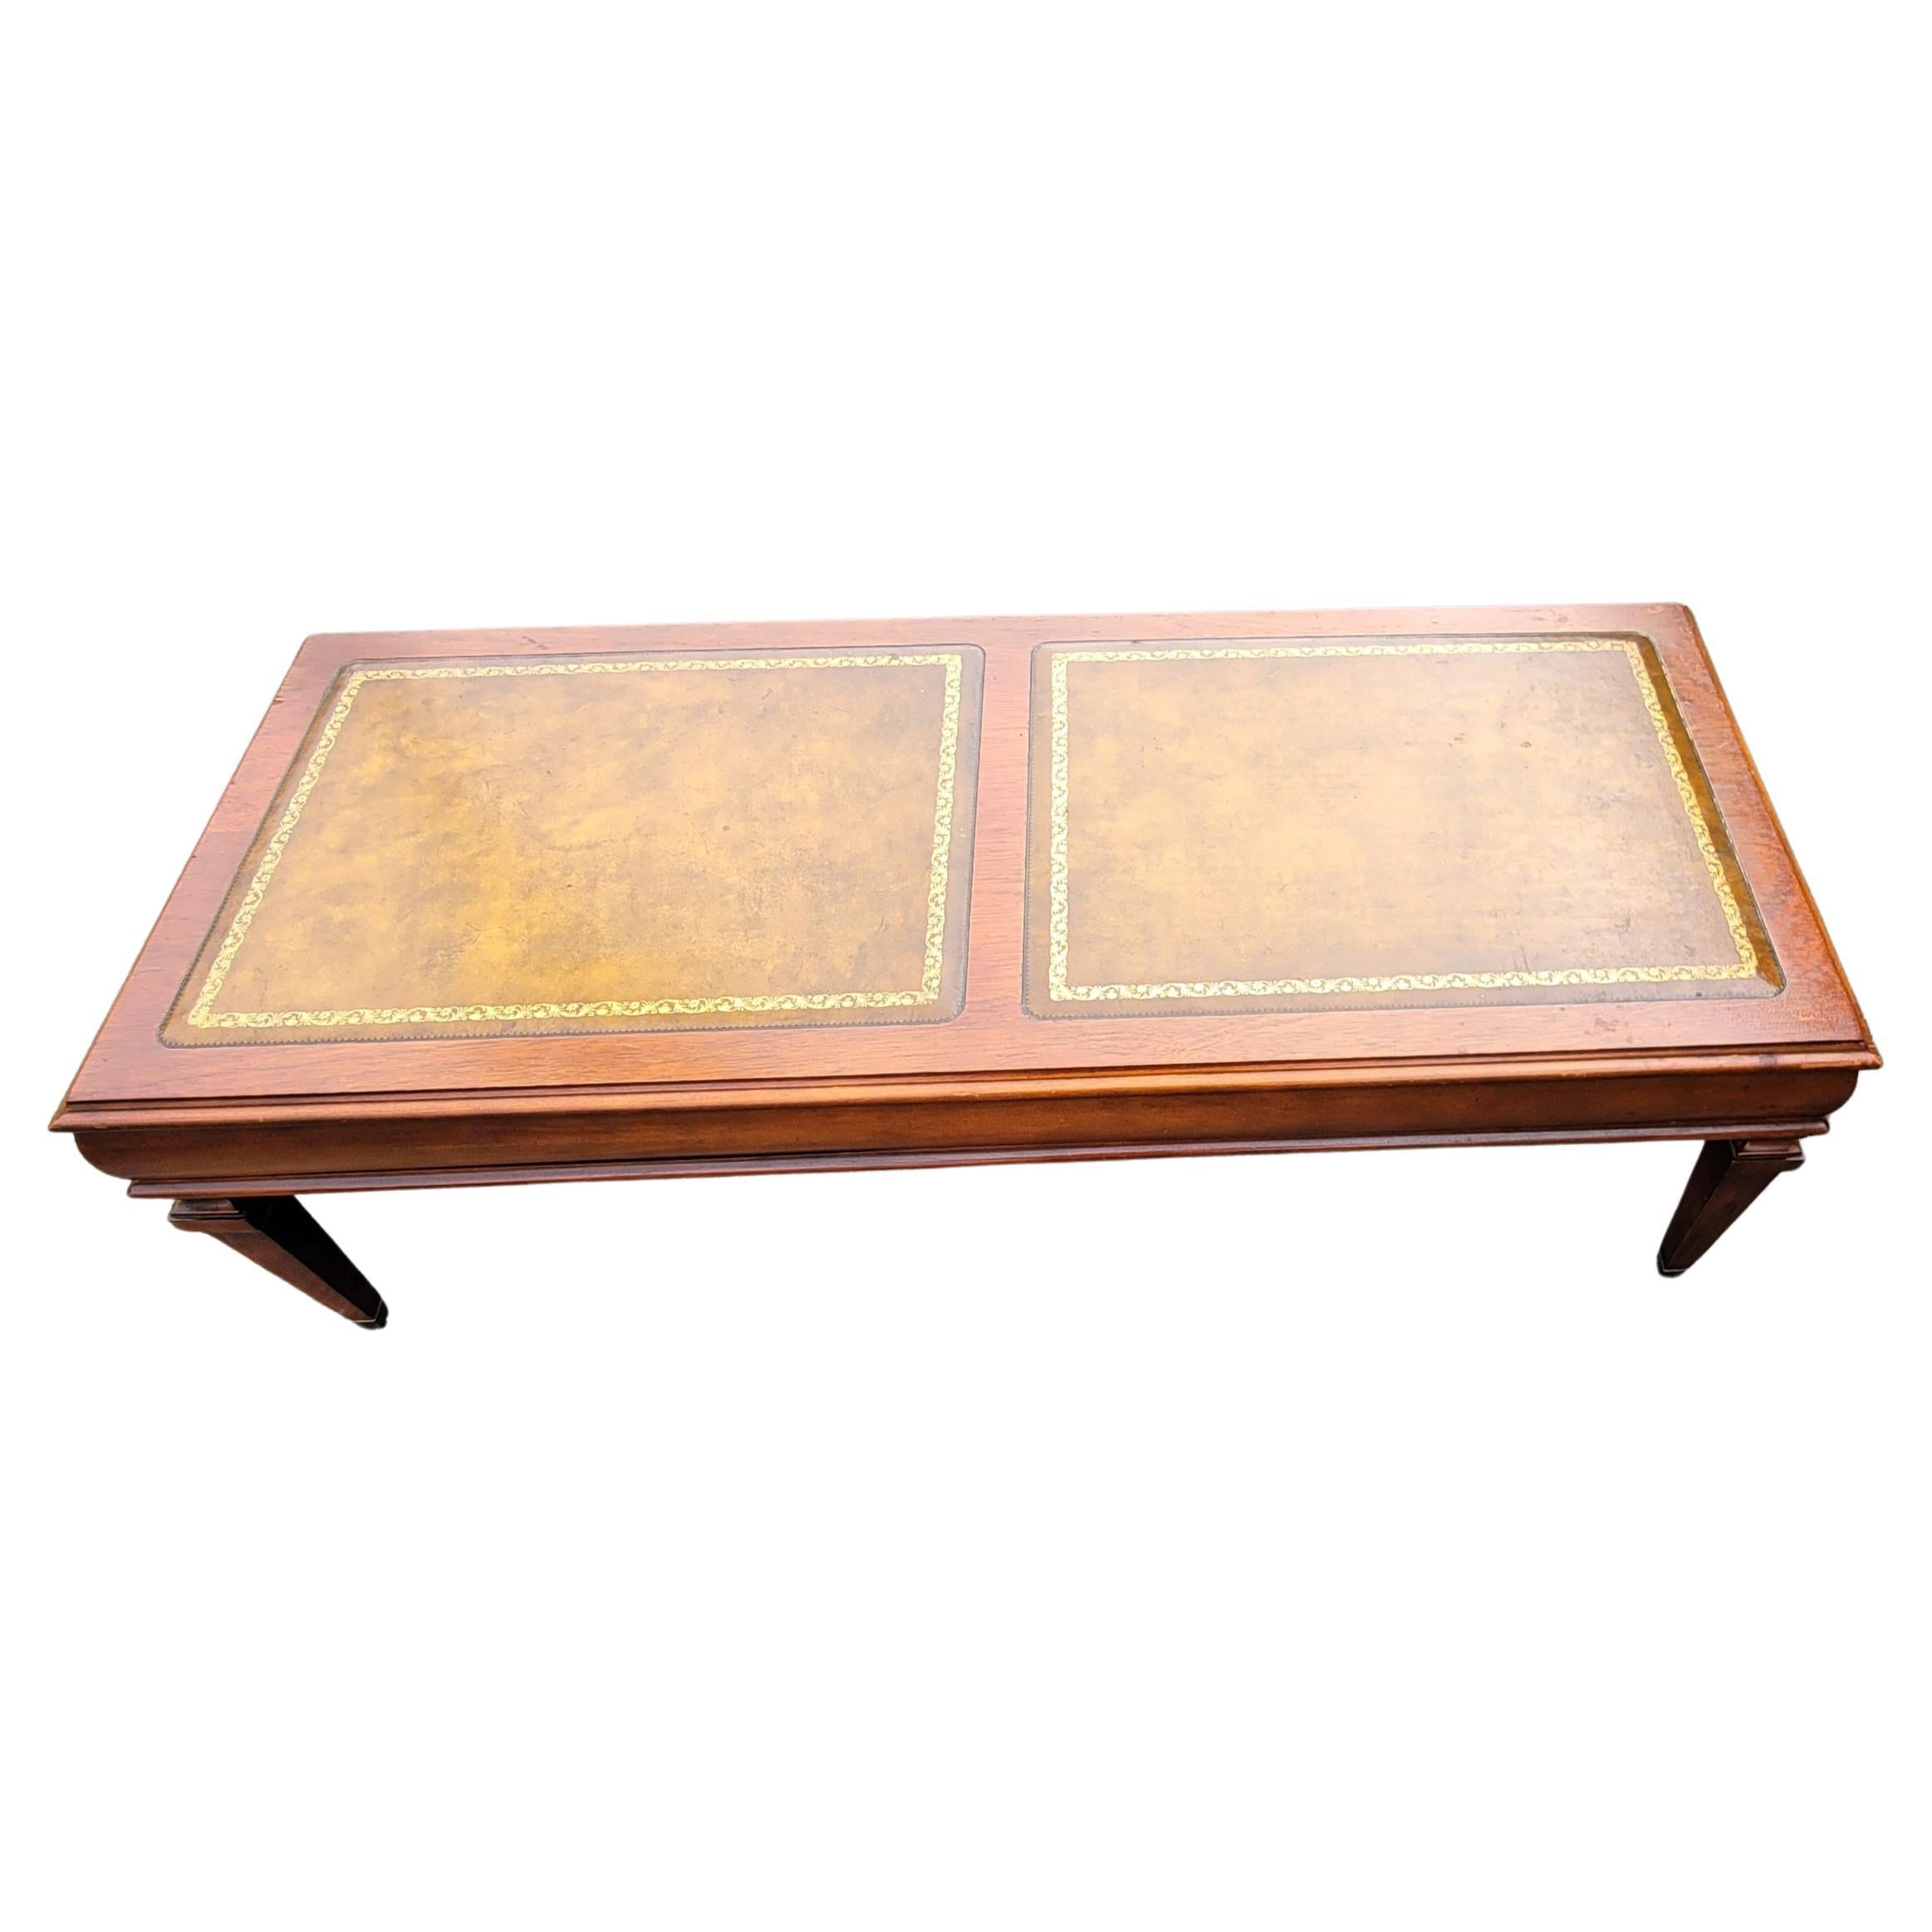 1961 Mahogany and Stenciled tooled leather dual paneled top cocktail table in good vintage condition. 
Measures 48